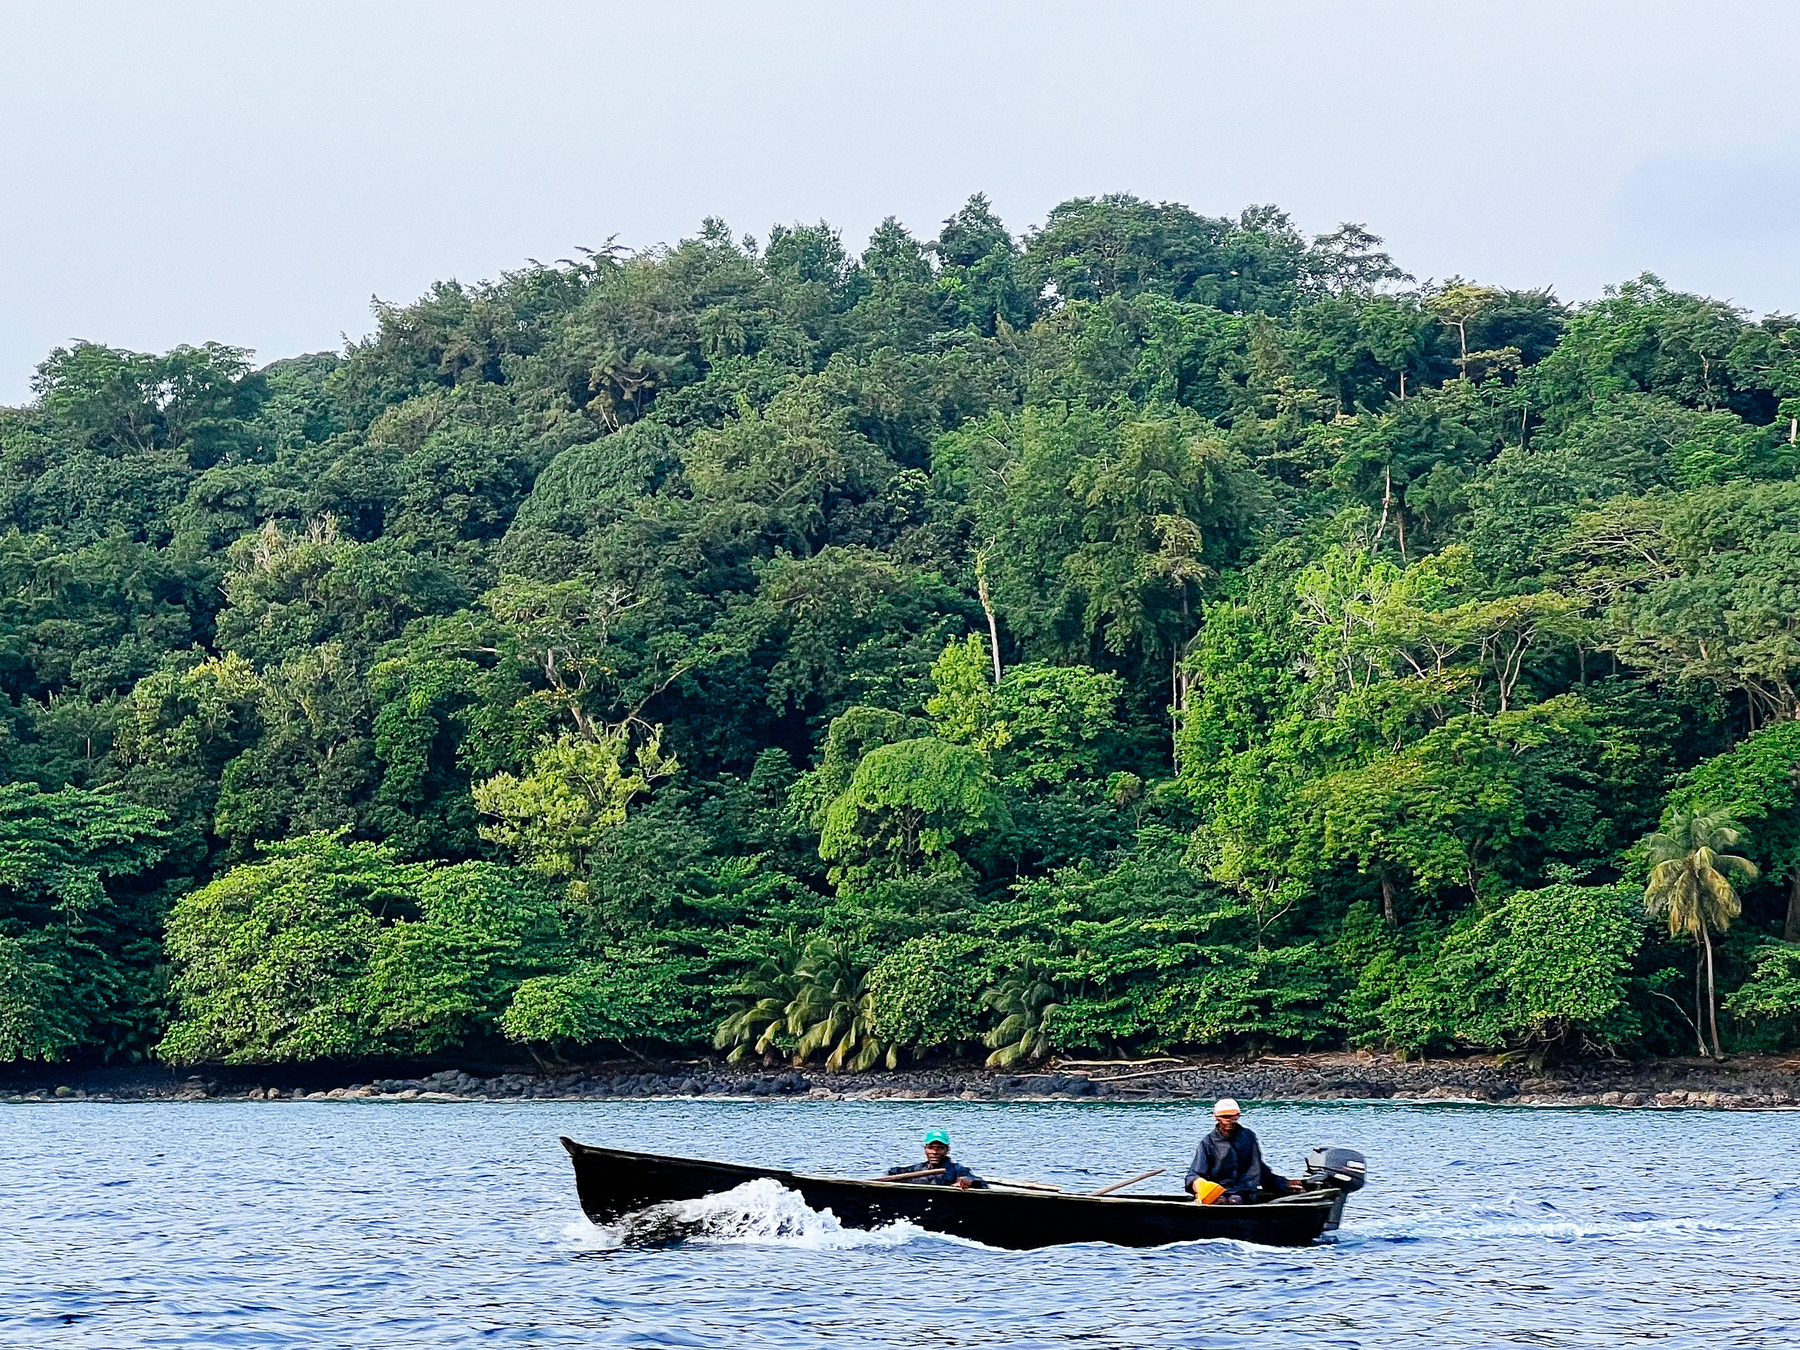 A couple of fishermen on a boat, with rainforest in the background. 